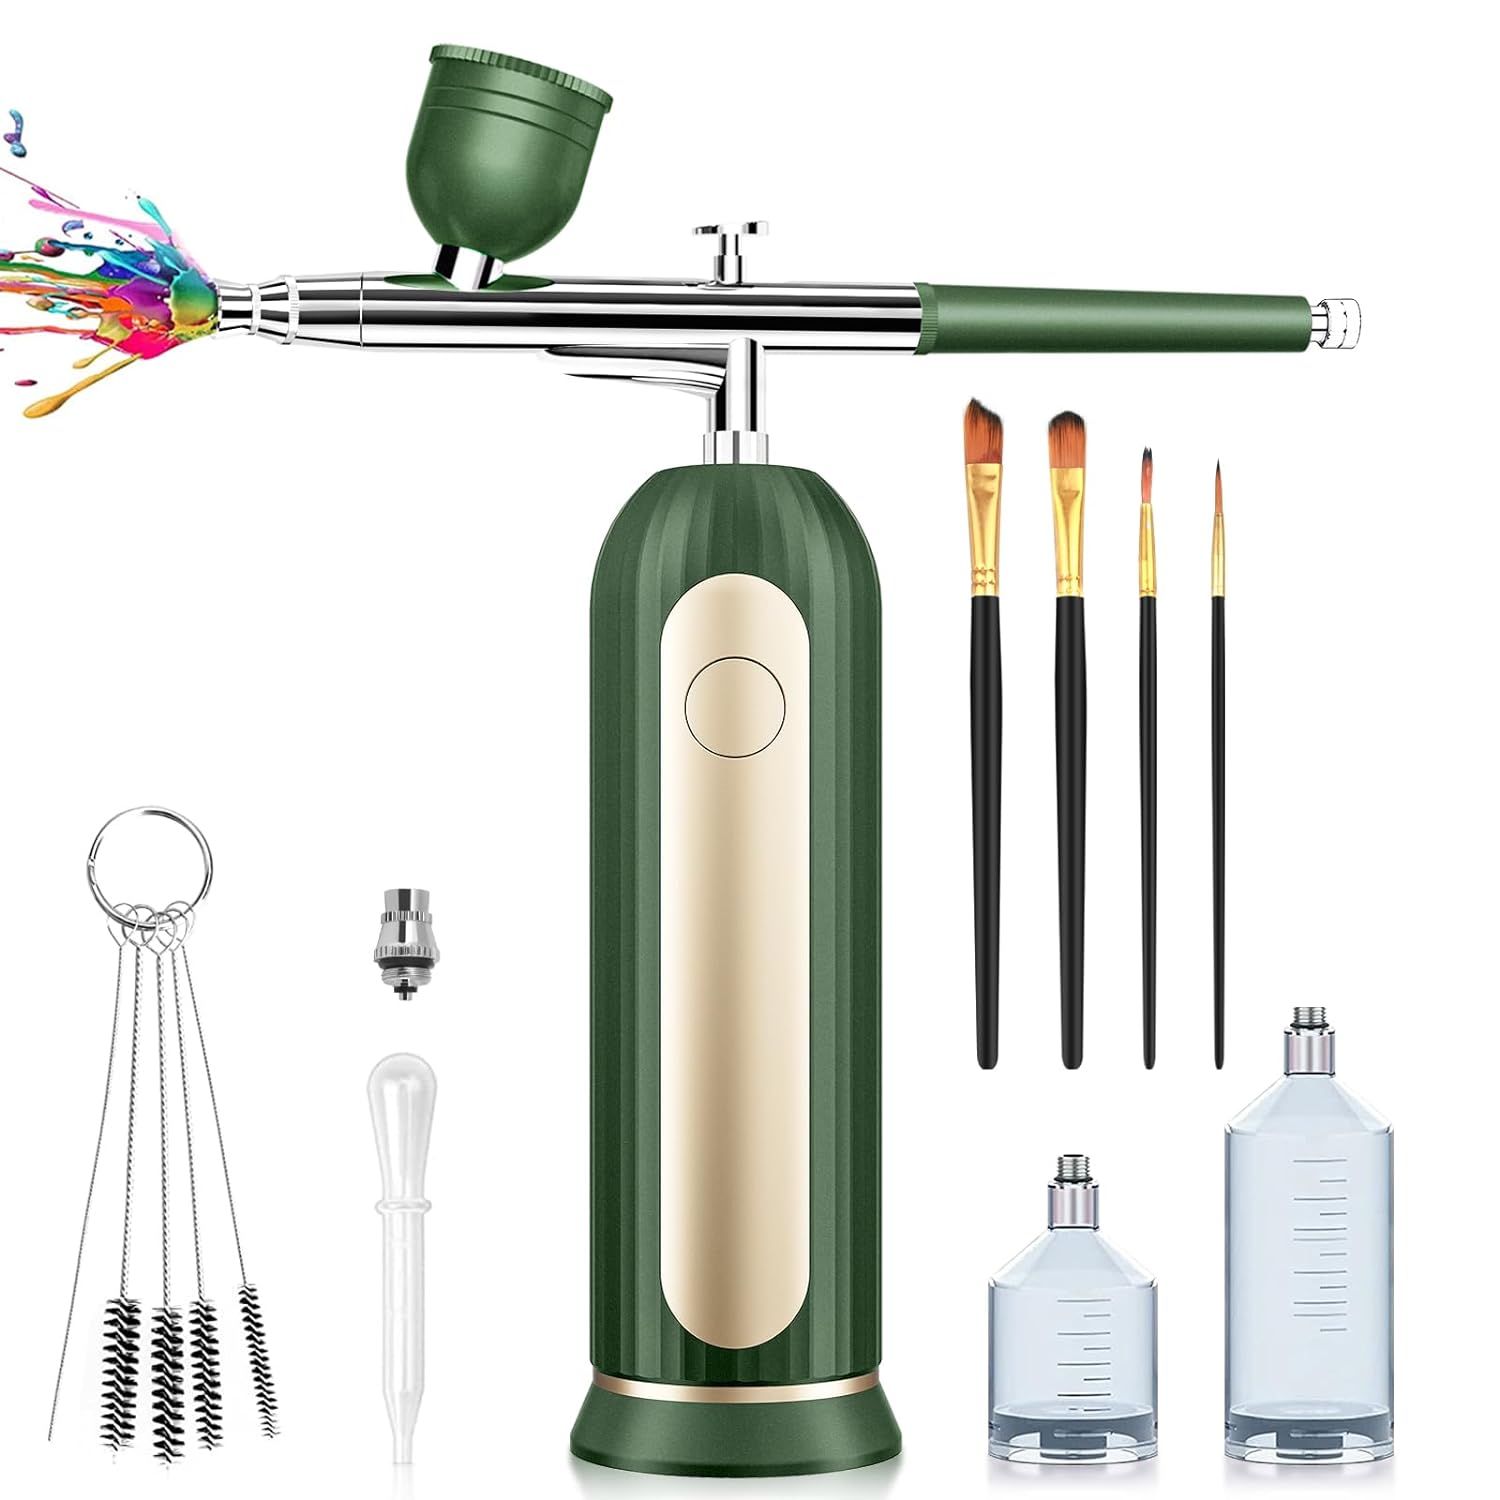 Airbrush Kit Rechargeable Cordless with Compressor - Portable Handheld Auto Airbrush Gun Set for Makeup Painting Cake Decor Nail Art Barbers Model Coloring(Green)